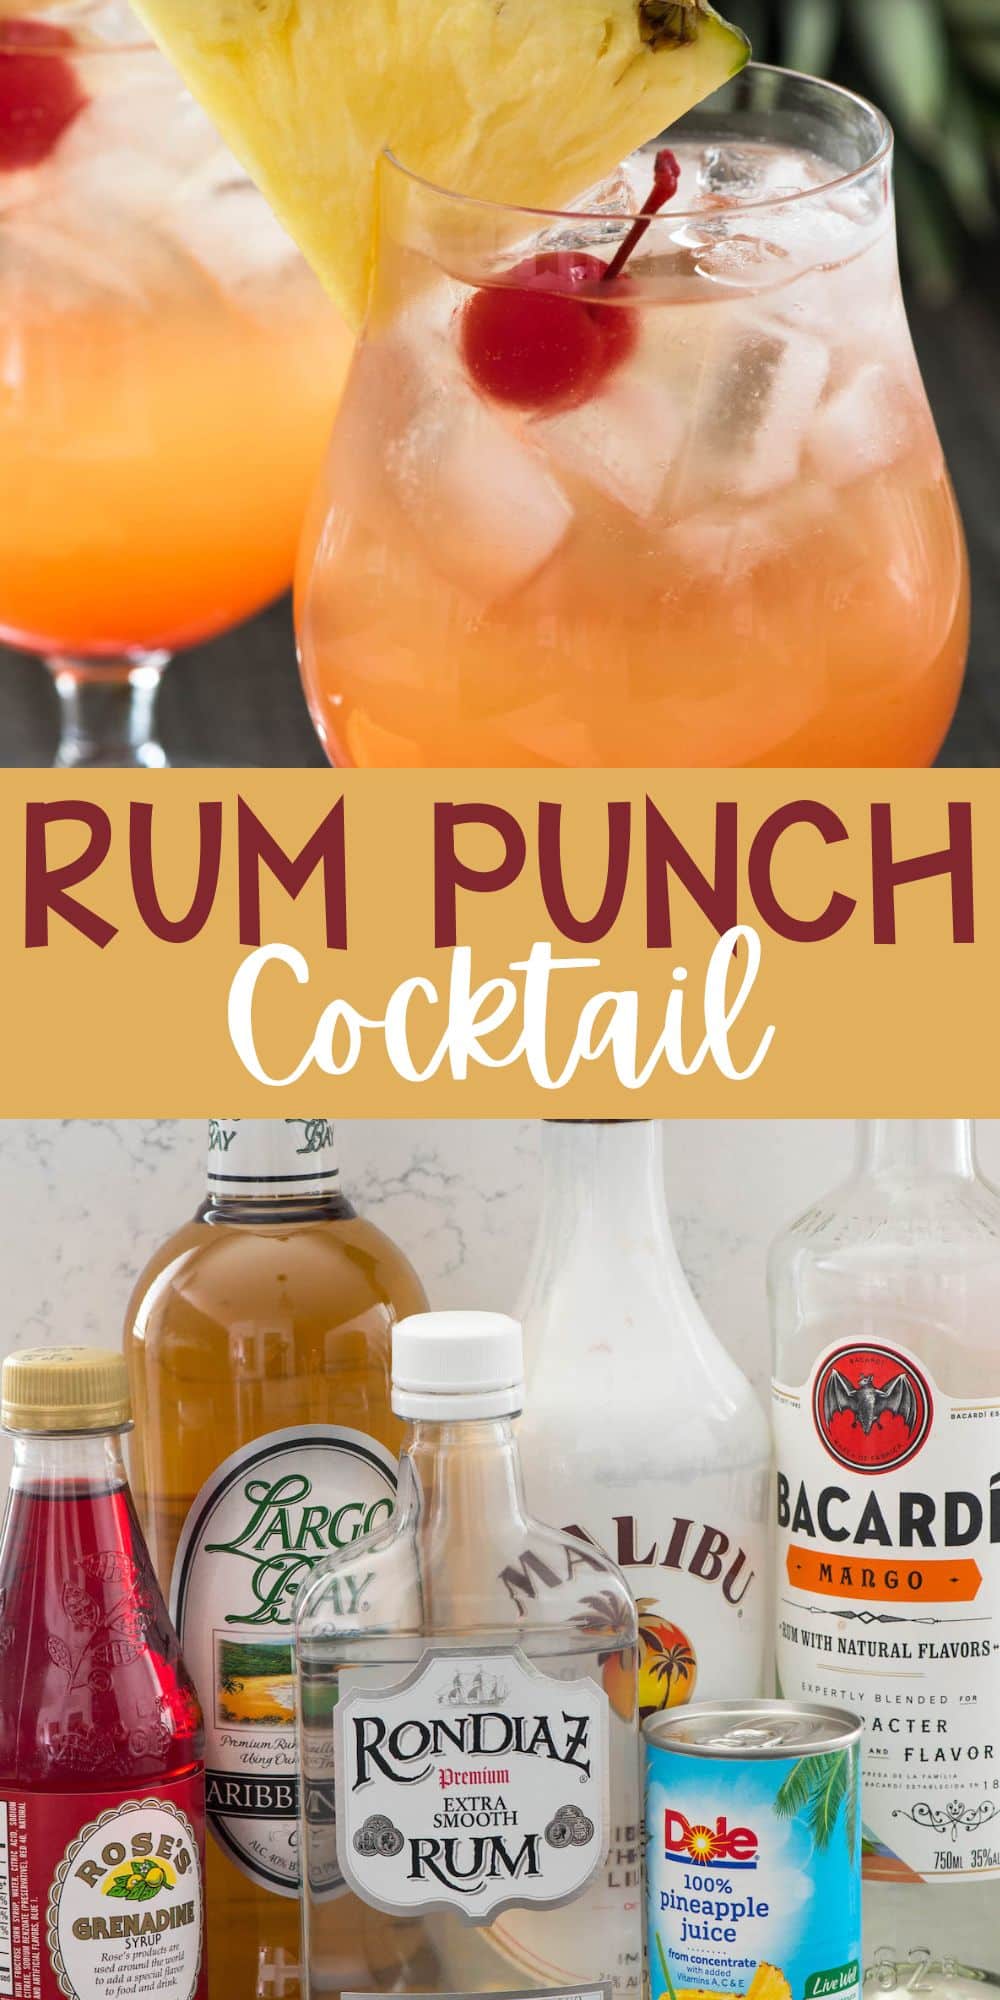 Boat House Punch Cocktail Recipe